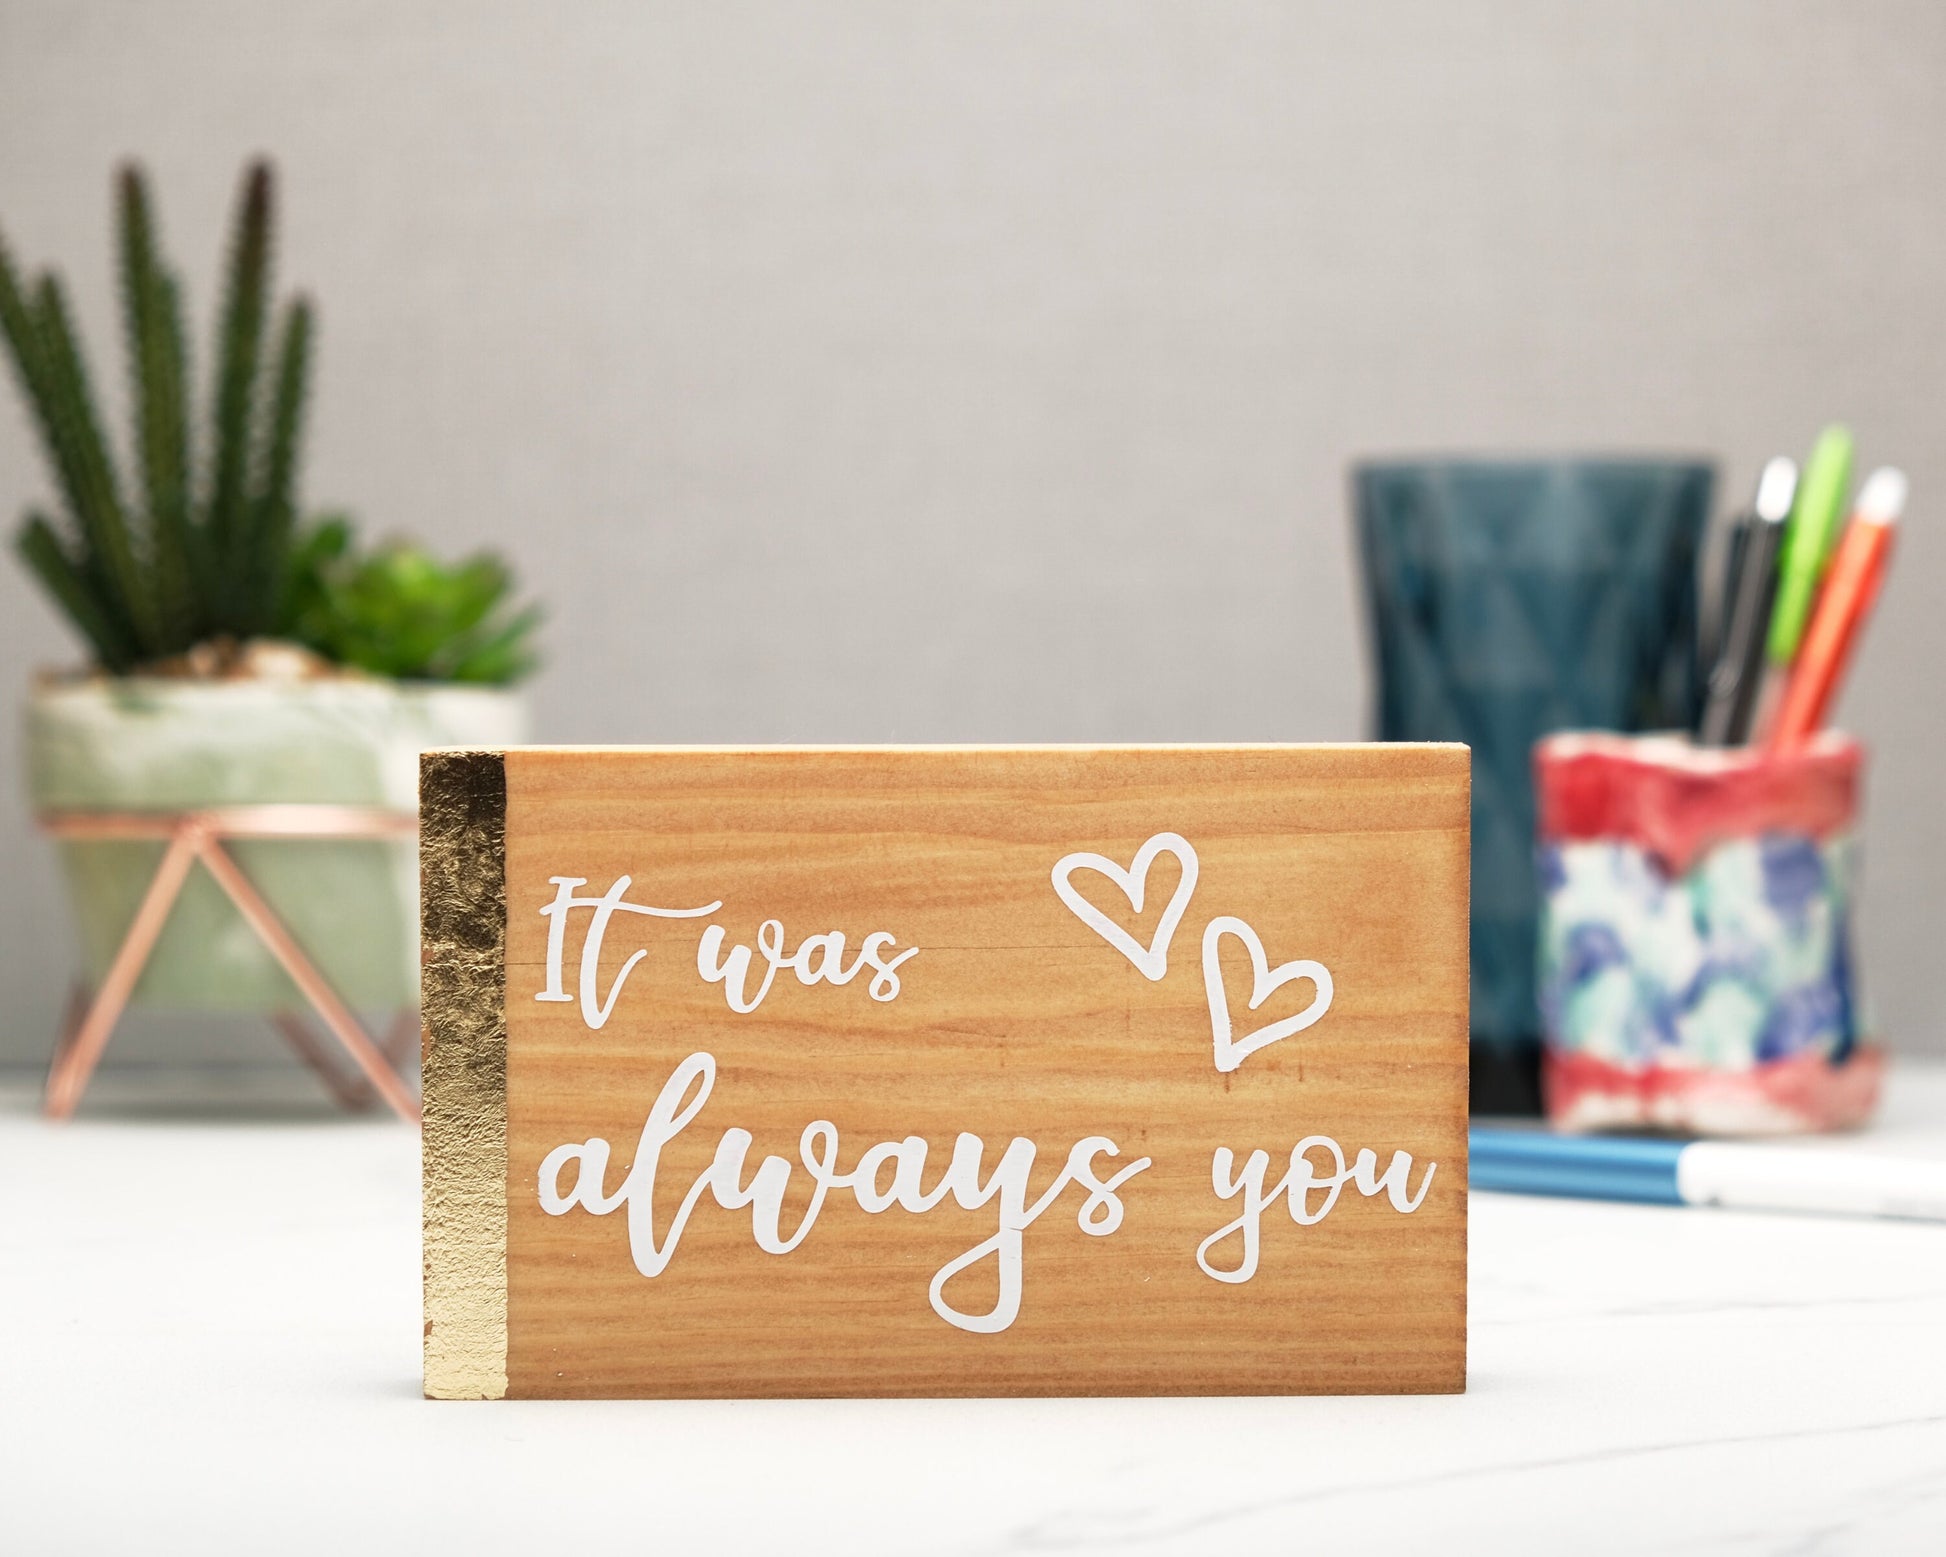 Small freestanding rectangular wooden sign facing straight on. Natural wood with gold vertical border on left side. White painted message, It was always you, with two heart outlines top right corner. Plant and pen pot out of focus in background.